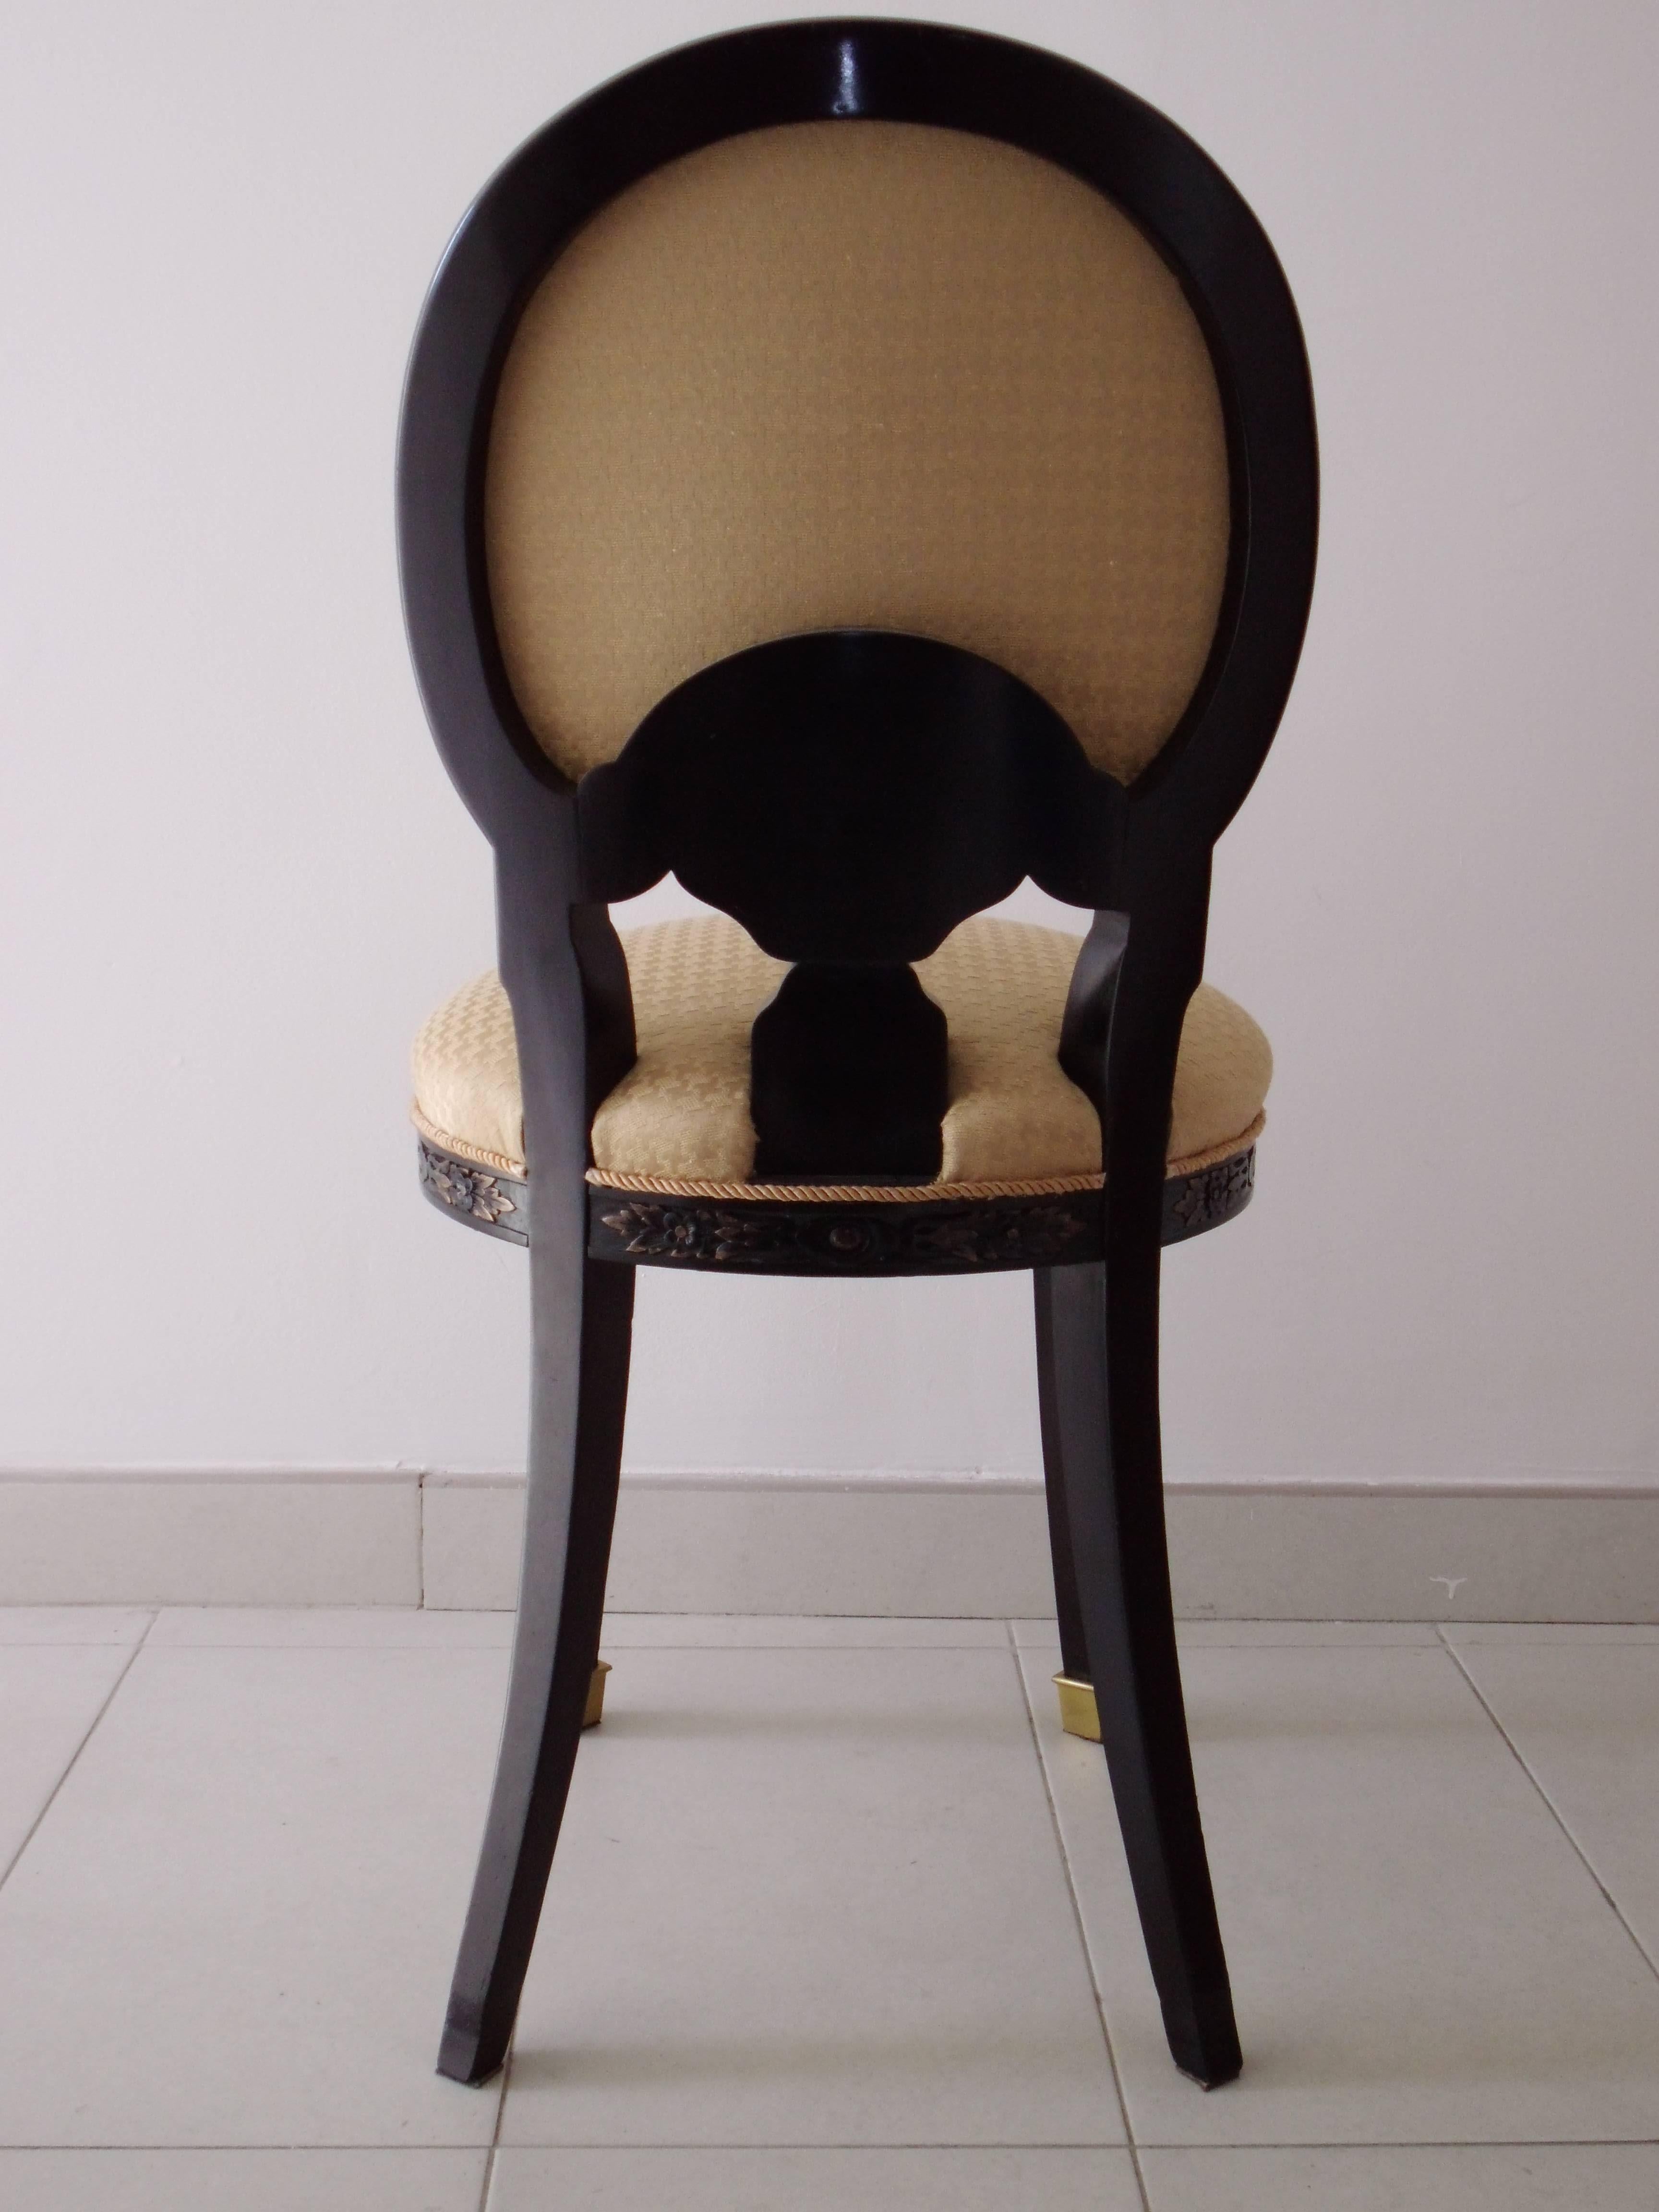 19th century single chair in black and yellow.